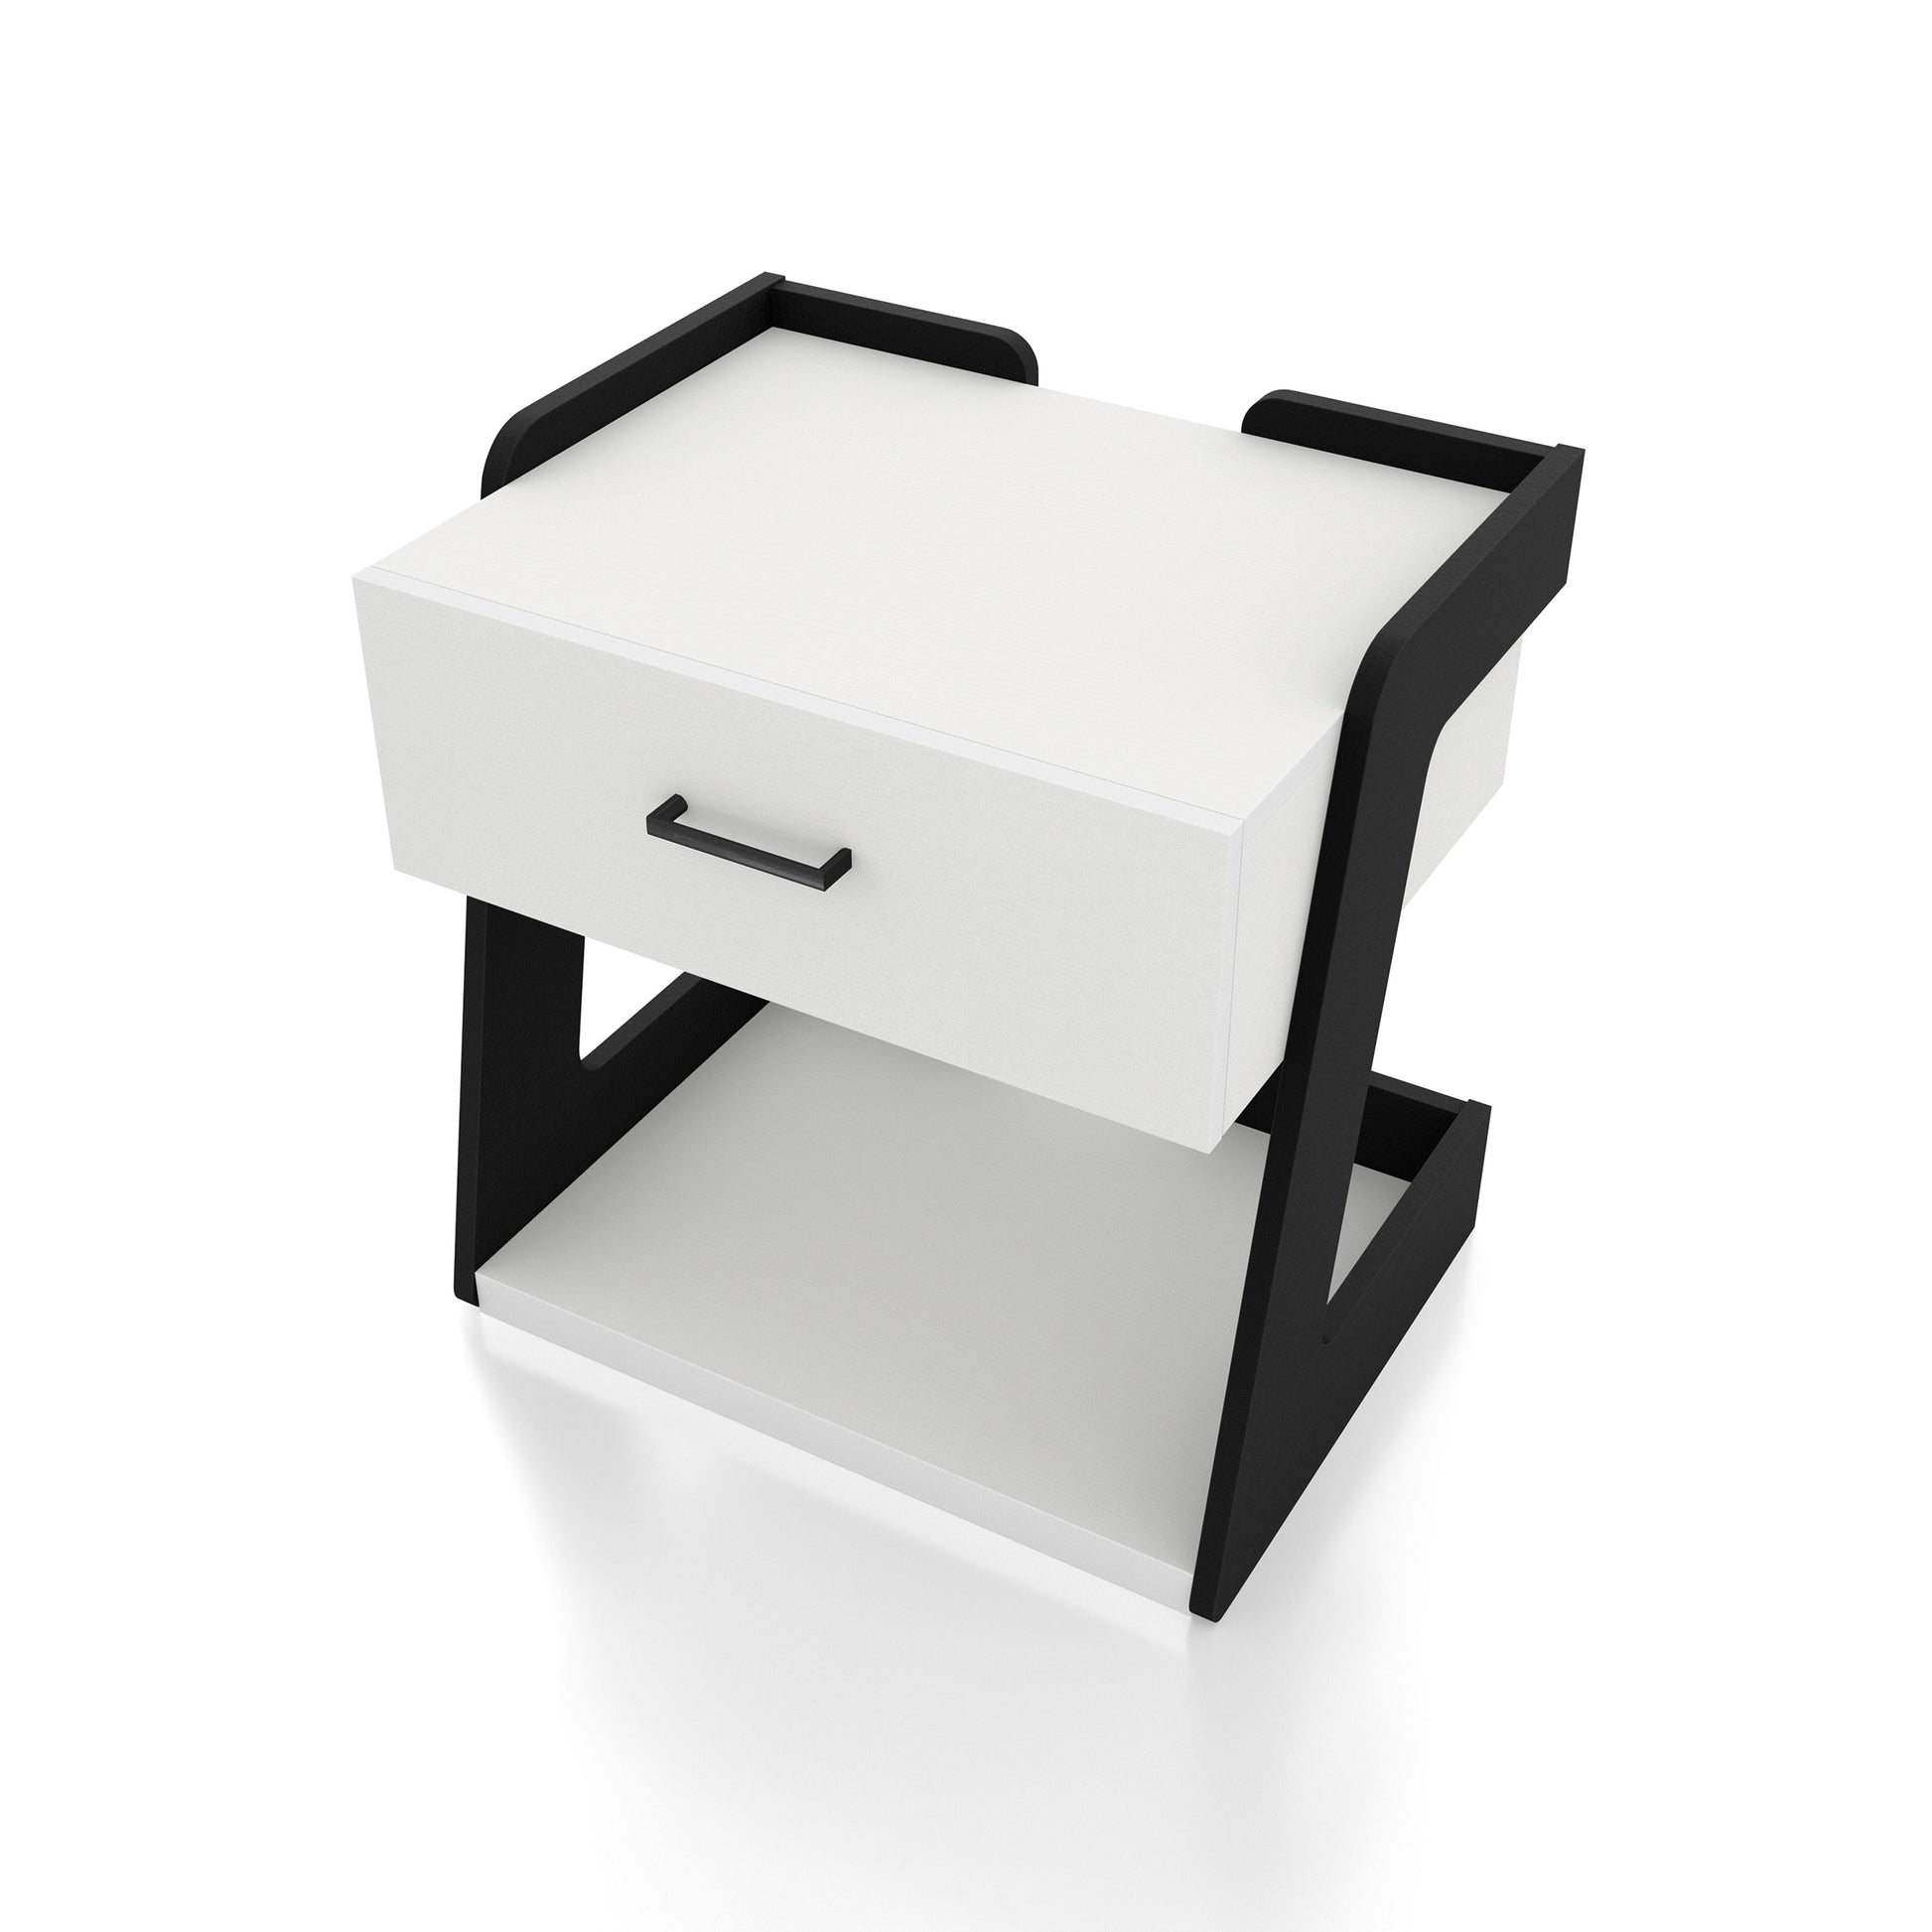 Left angled bird's eye view of a contemporary white and black one-drawer side table with a shelf on a white background